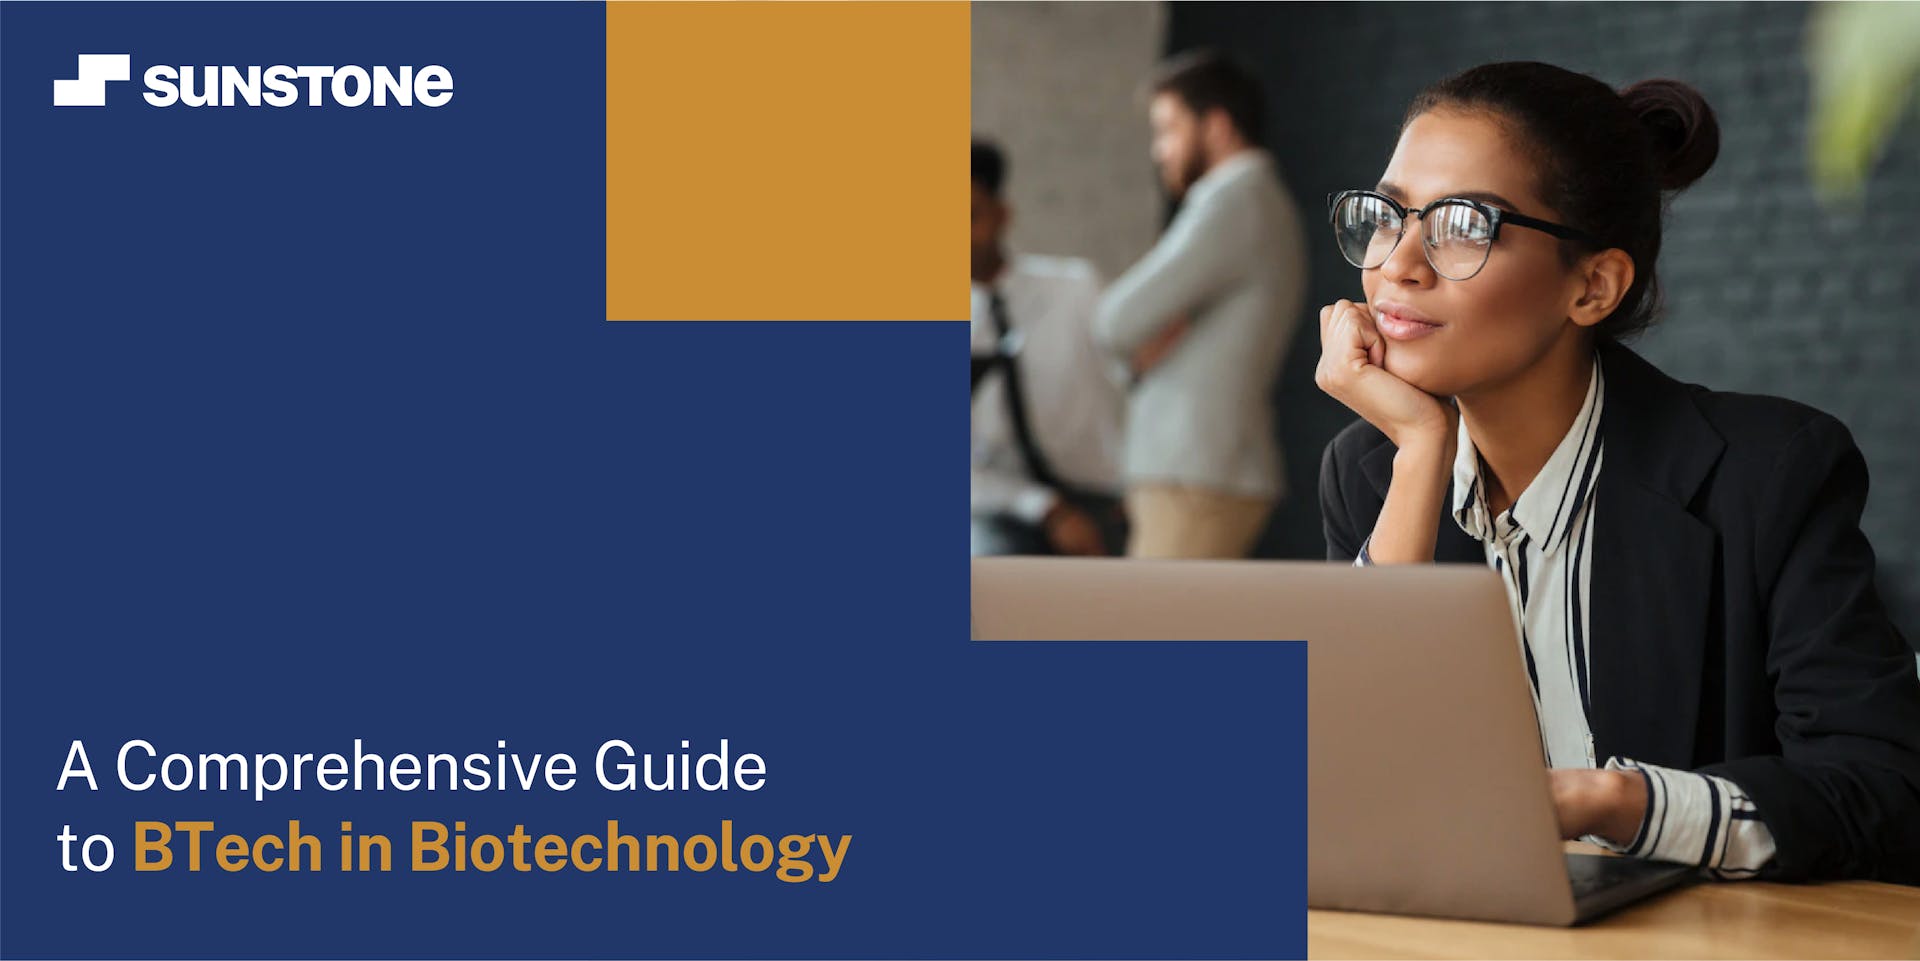 B.Tech in Biotechnology - A Comprehensive Guide | Sunstone Blog